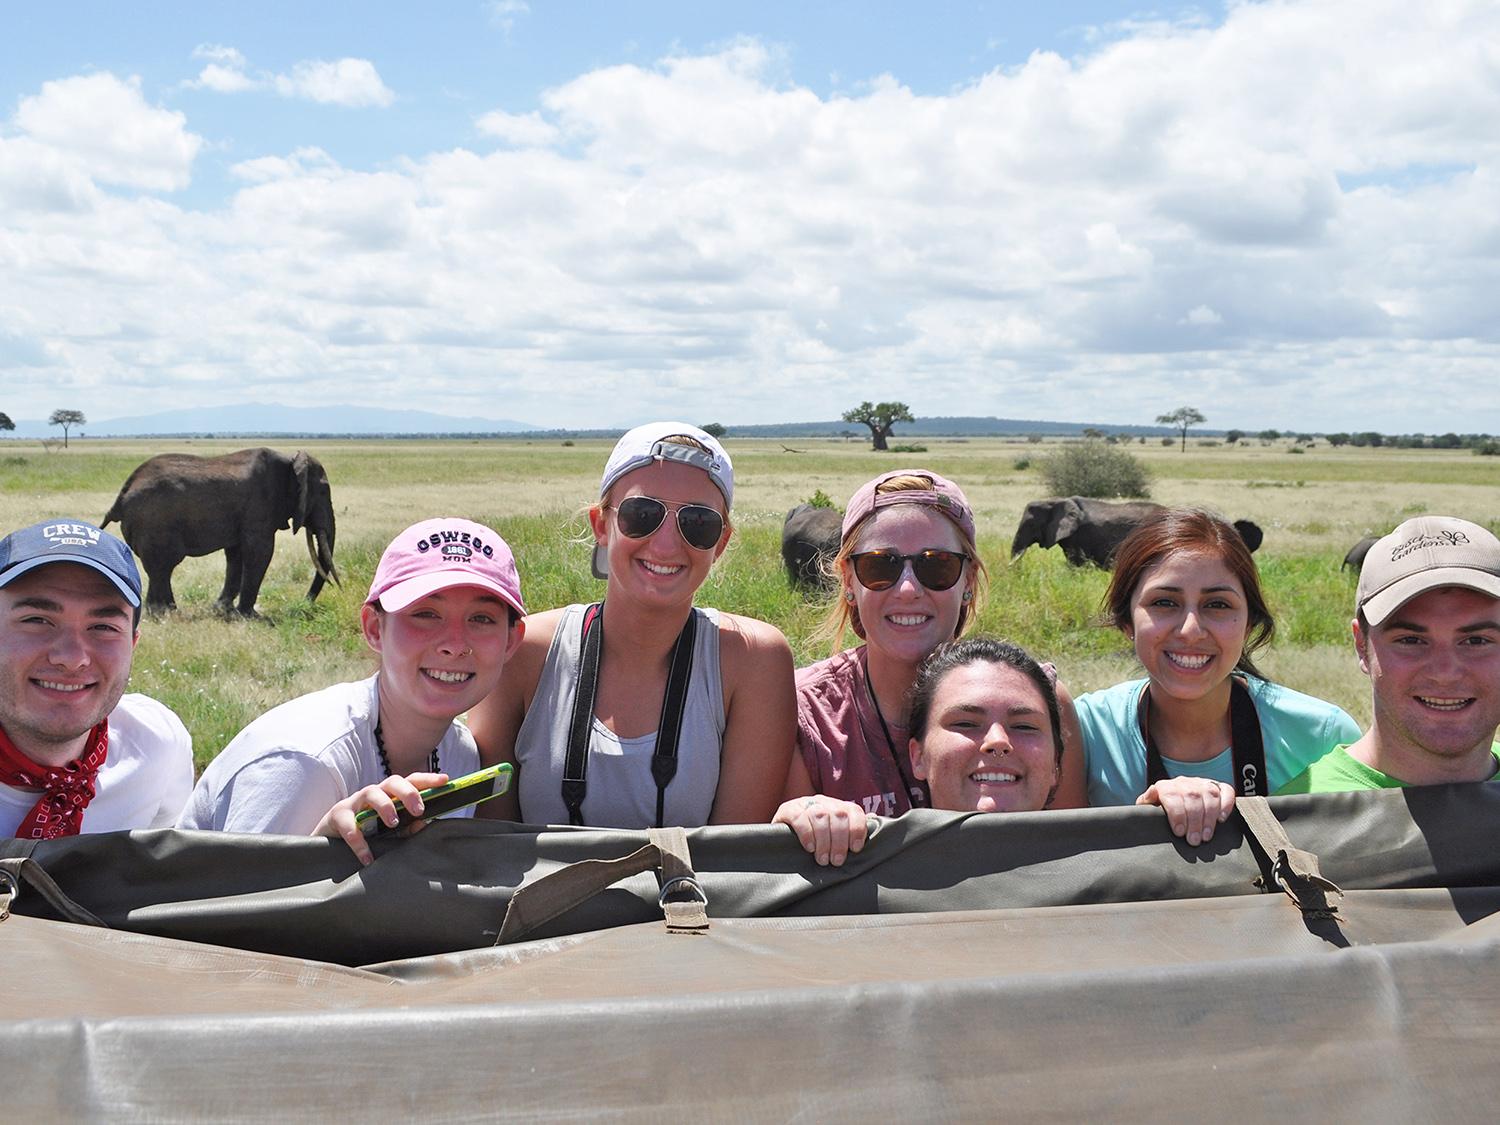 Students pose with elephants in background